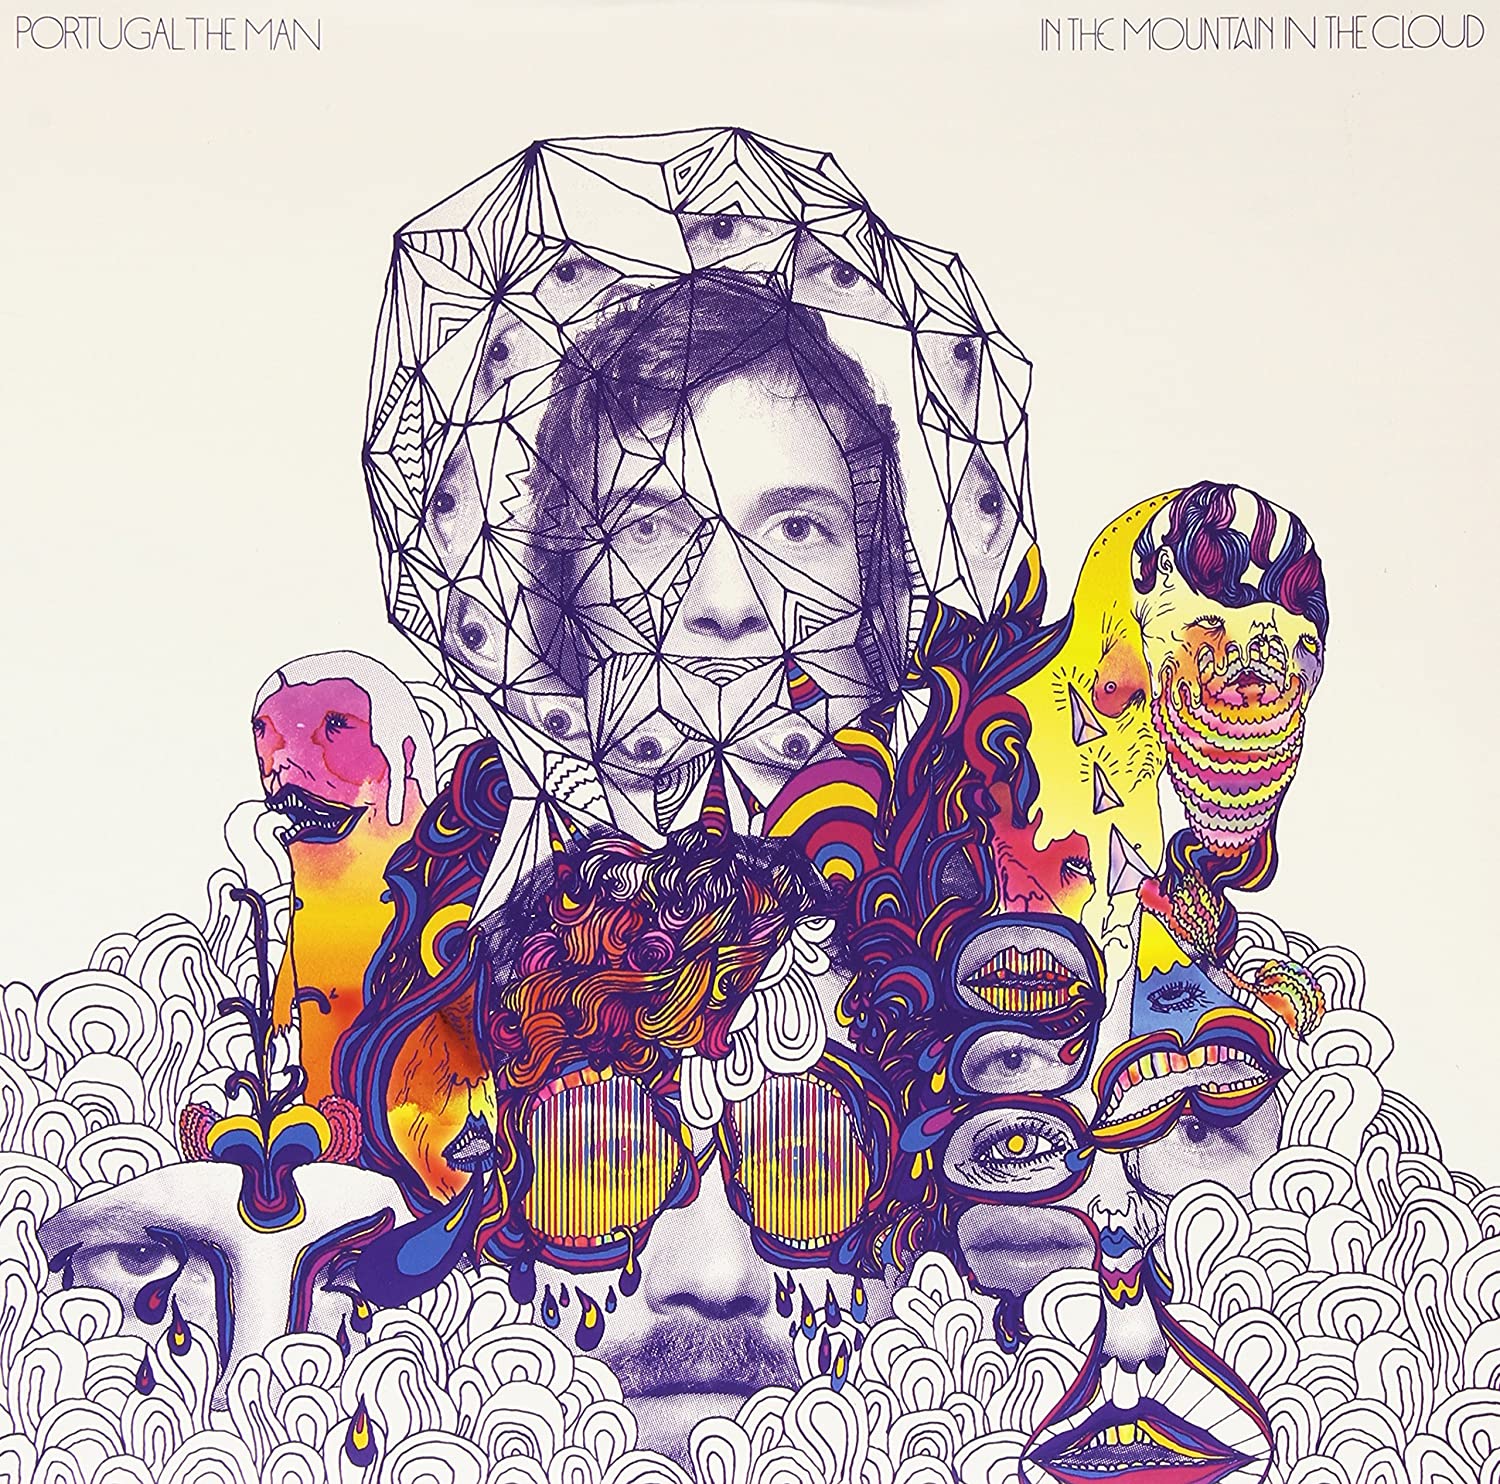 Portugal. The Man | In The Mountain In The Cloud | Vinyl